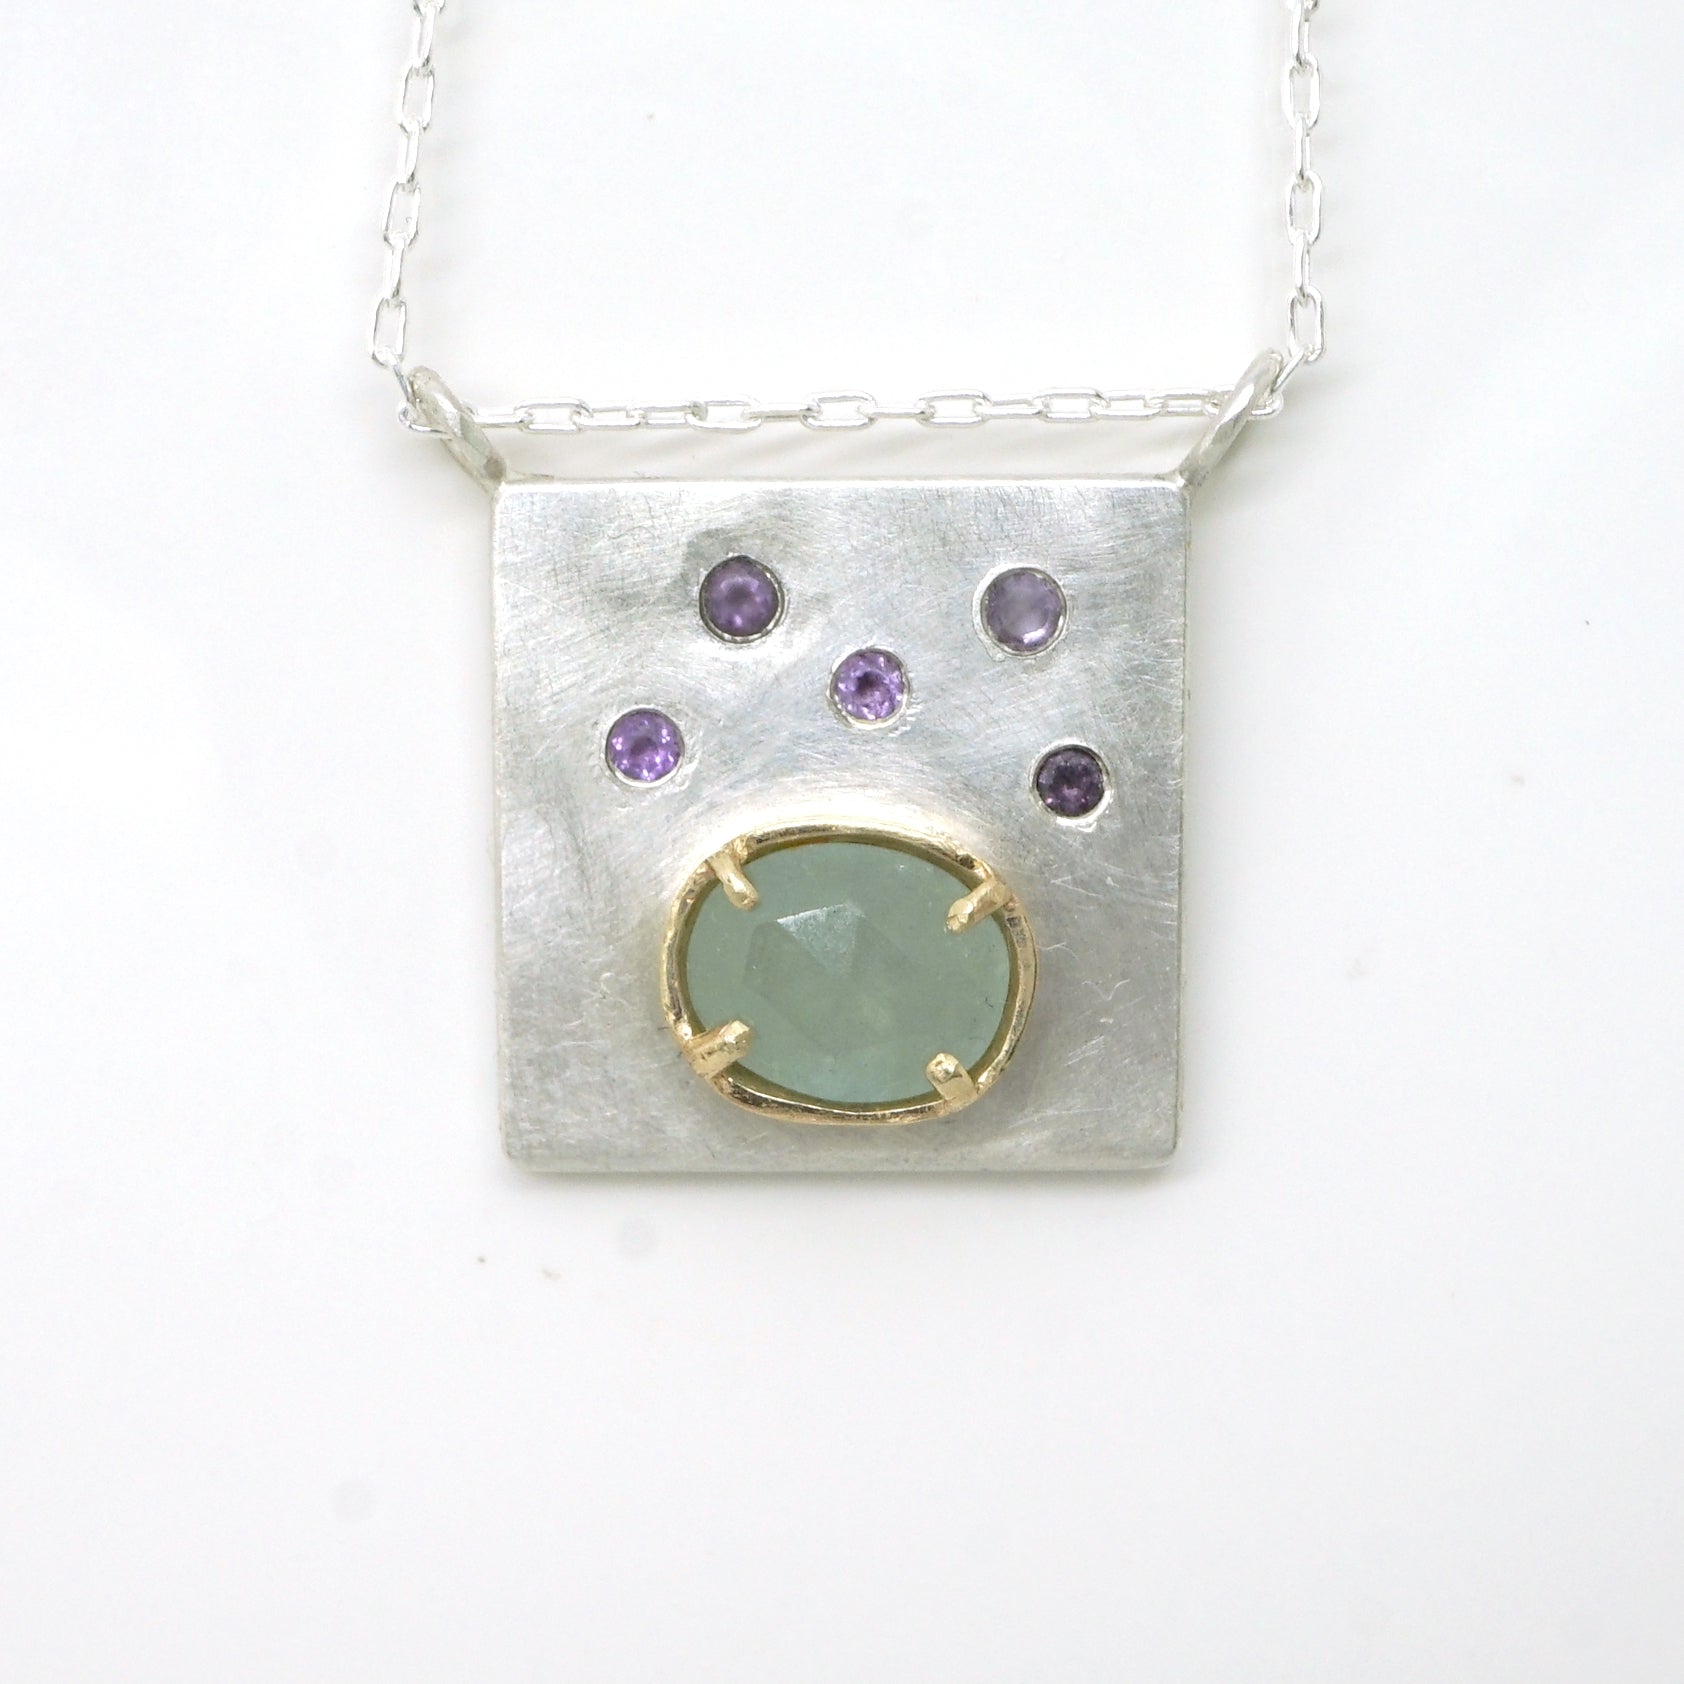 Art pendant necklace with amethyst and aquamarine